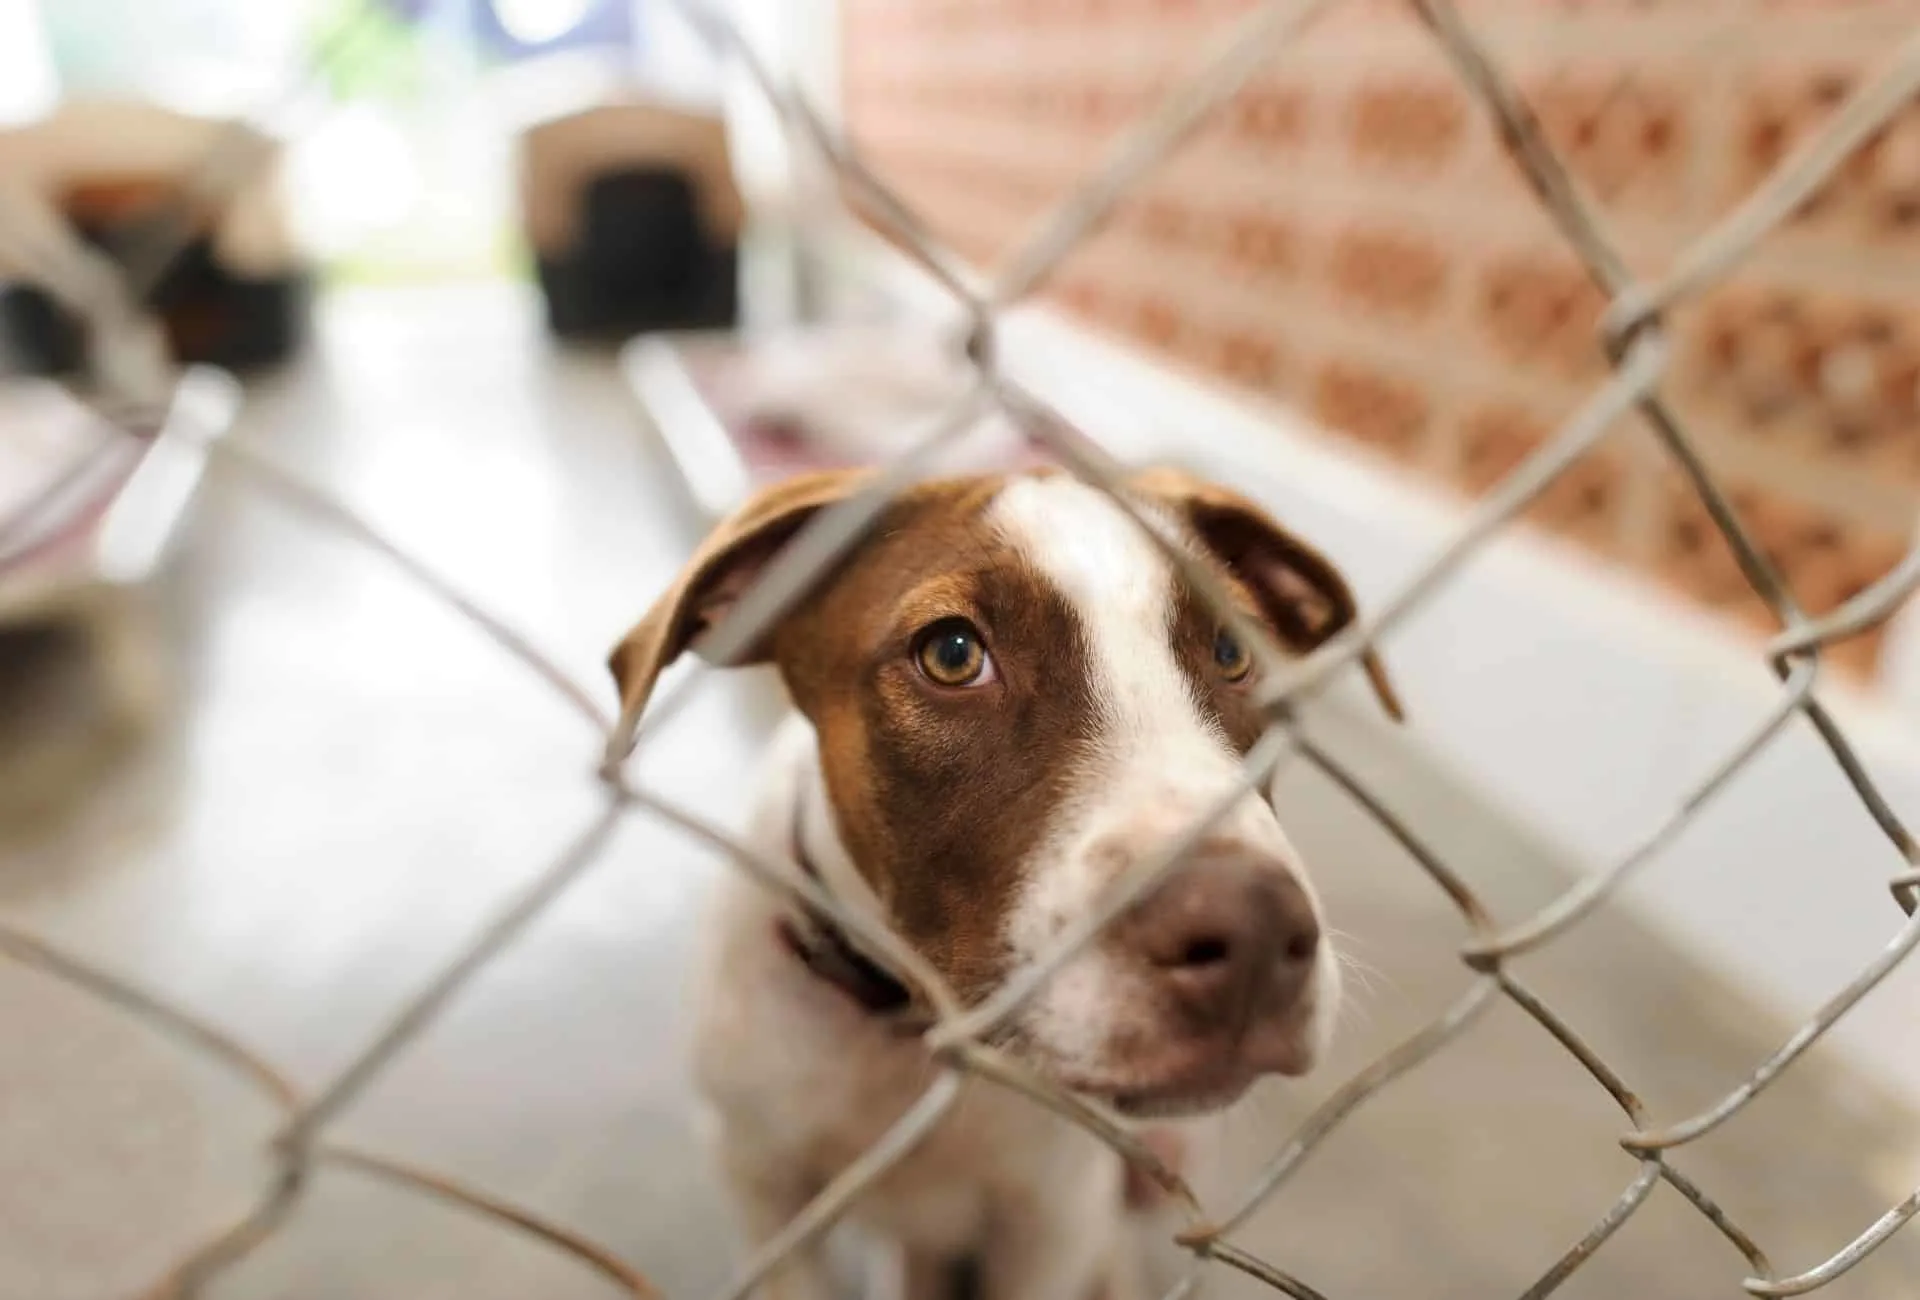 Dog inside his kennel inside the shelter with a sad look in his eyes.